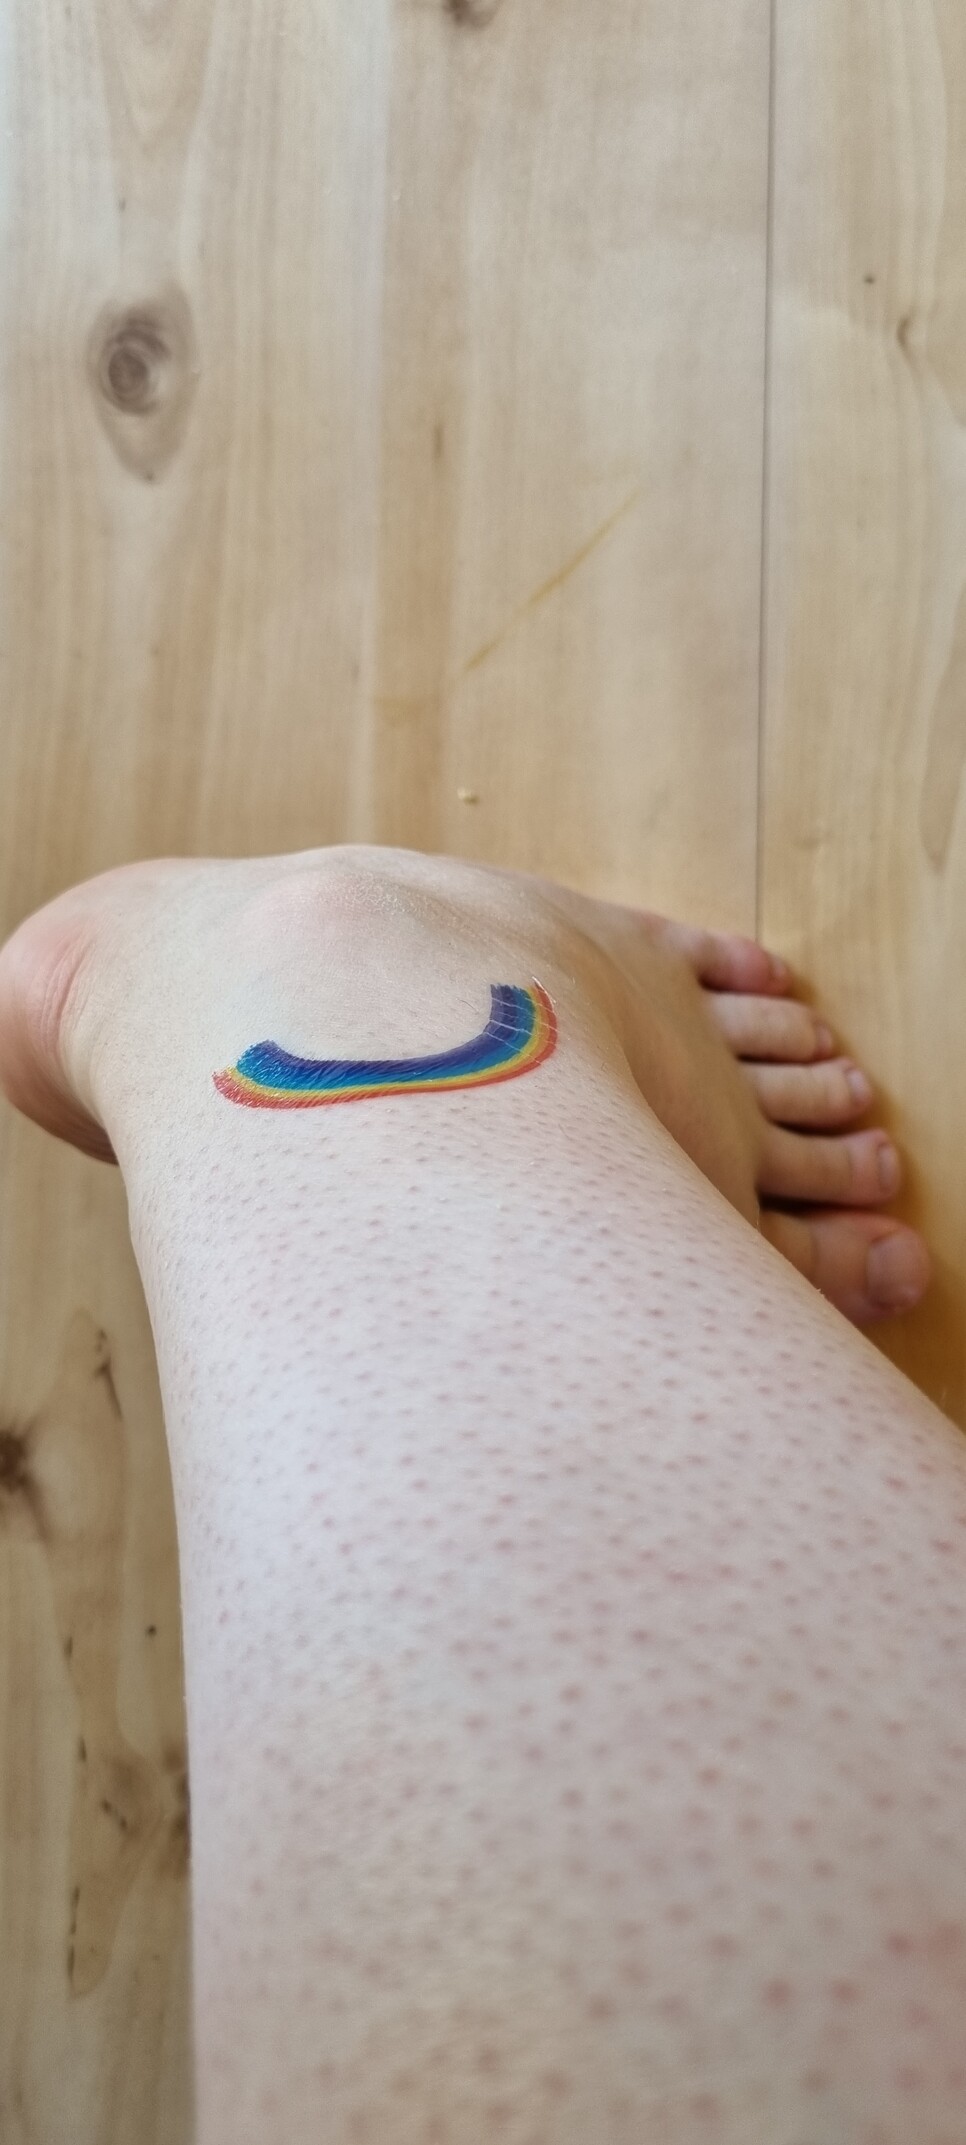 A picture of my leg with a foot at the end. There is a rainbow on it